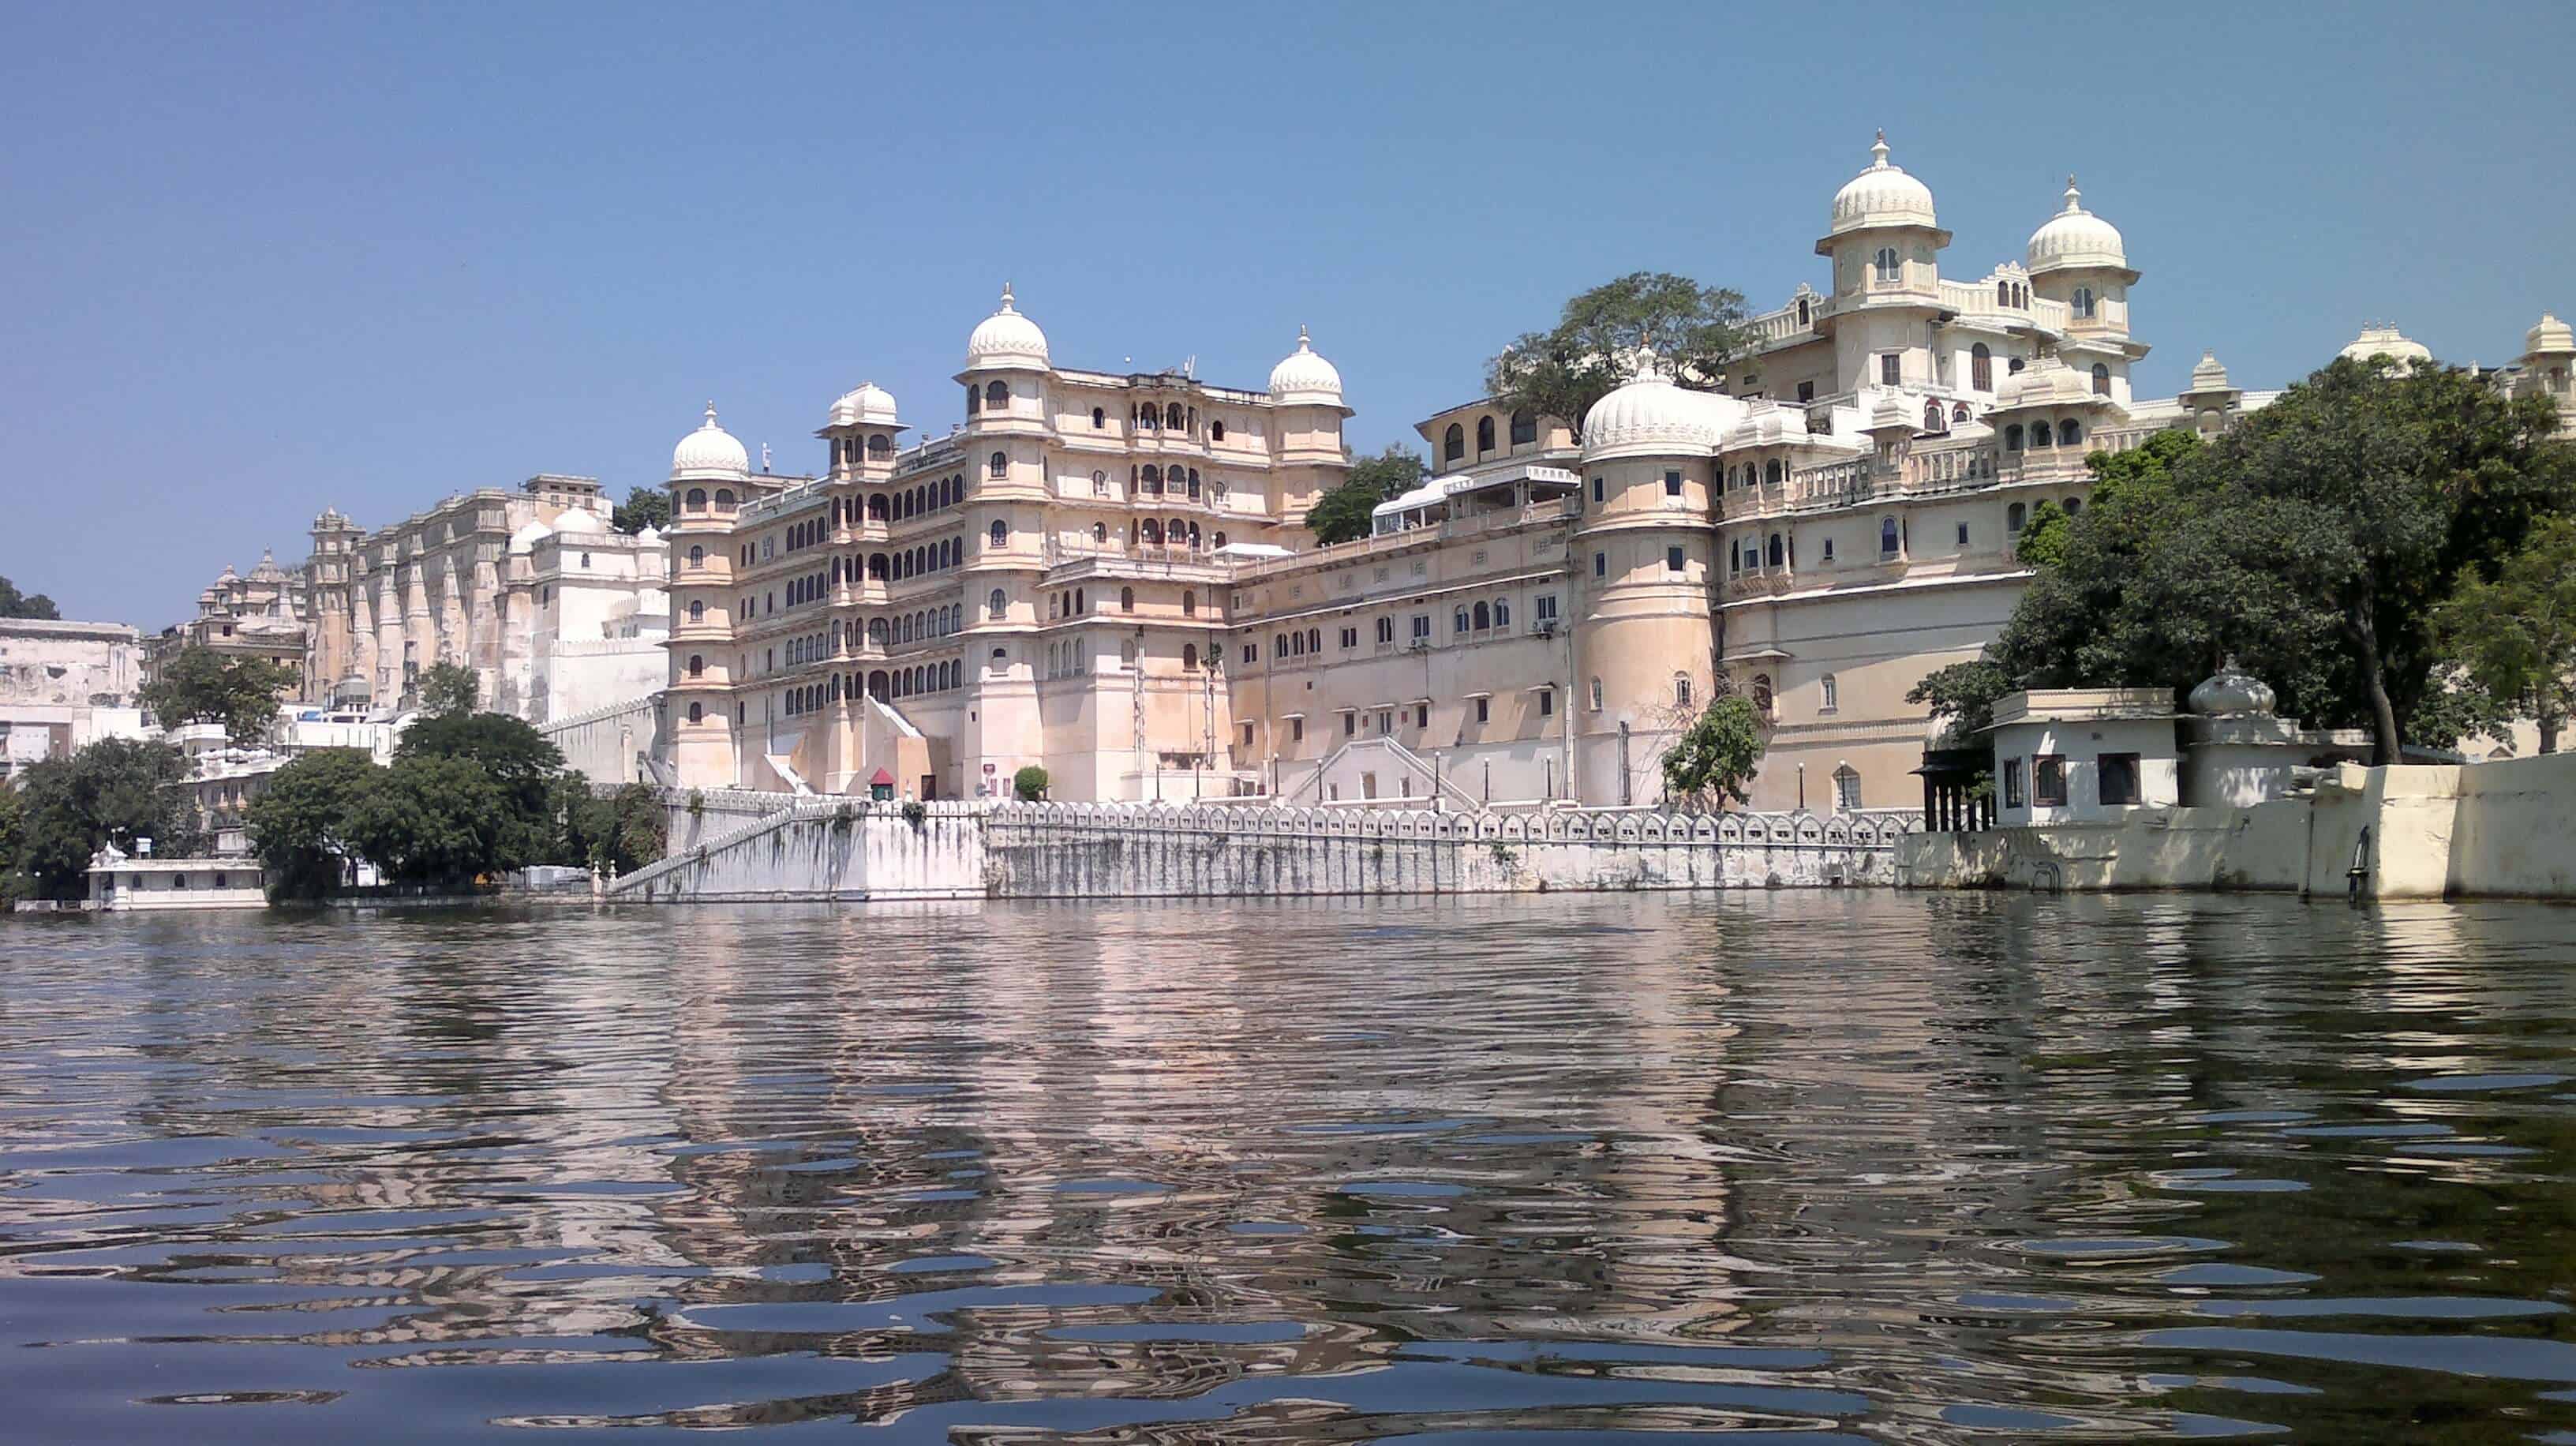 Udaipur, the white city